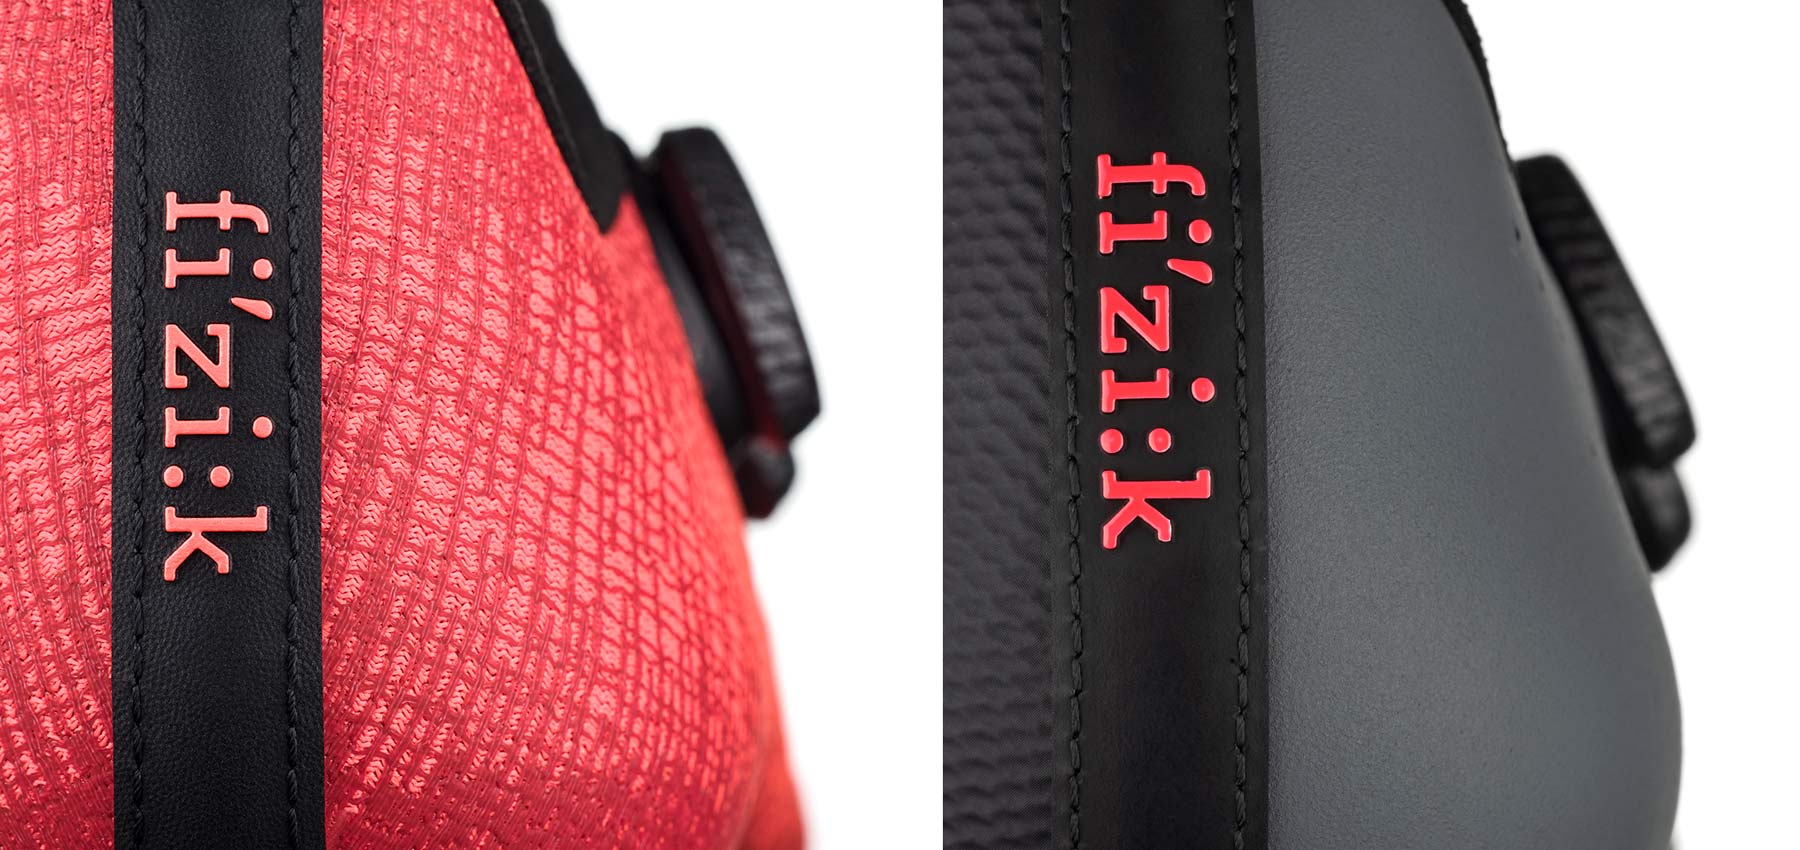 Fizik-Vento-Infinito-Carbon-2-road-shoes_lightweight-breathable-stiff-microtex-or-knit-road-racing-shoes_heel-details.jpg